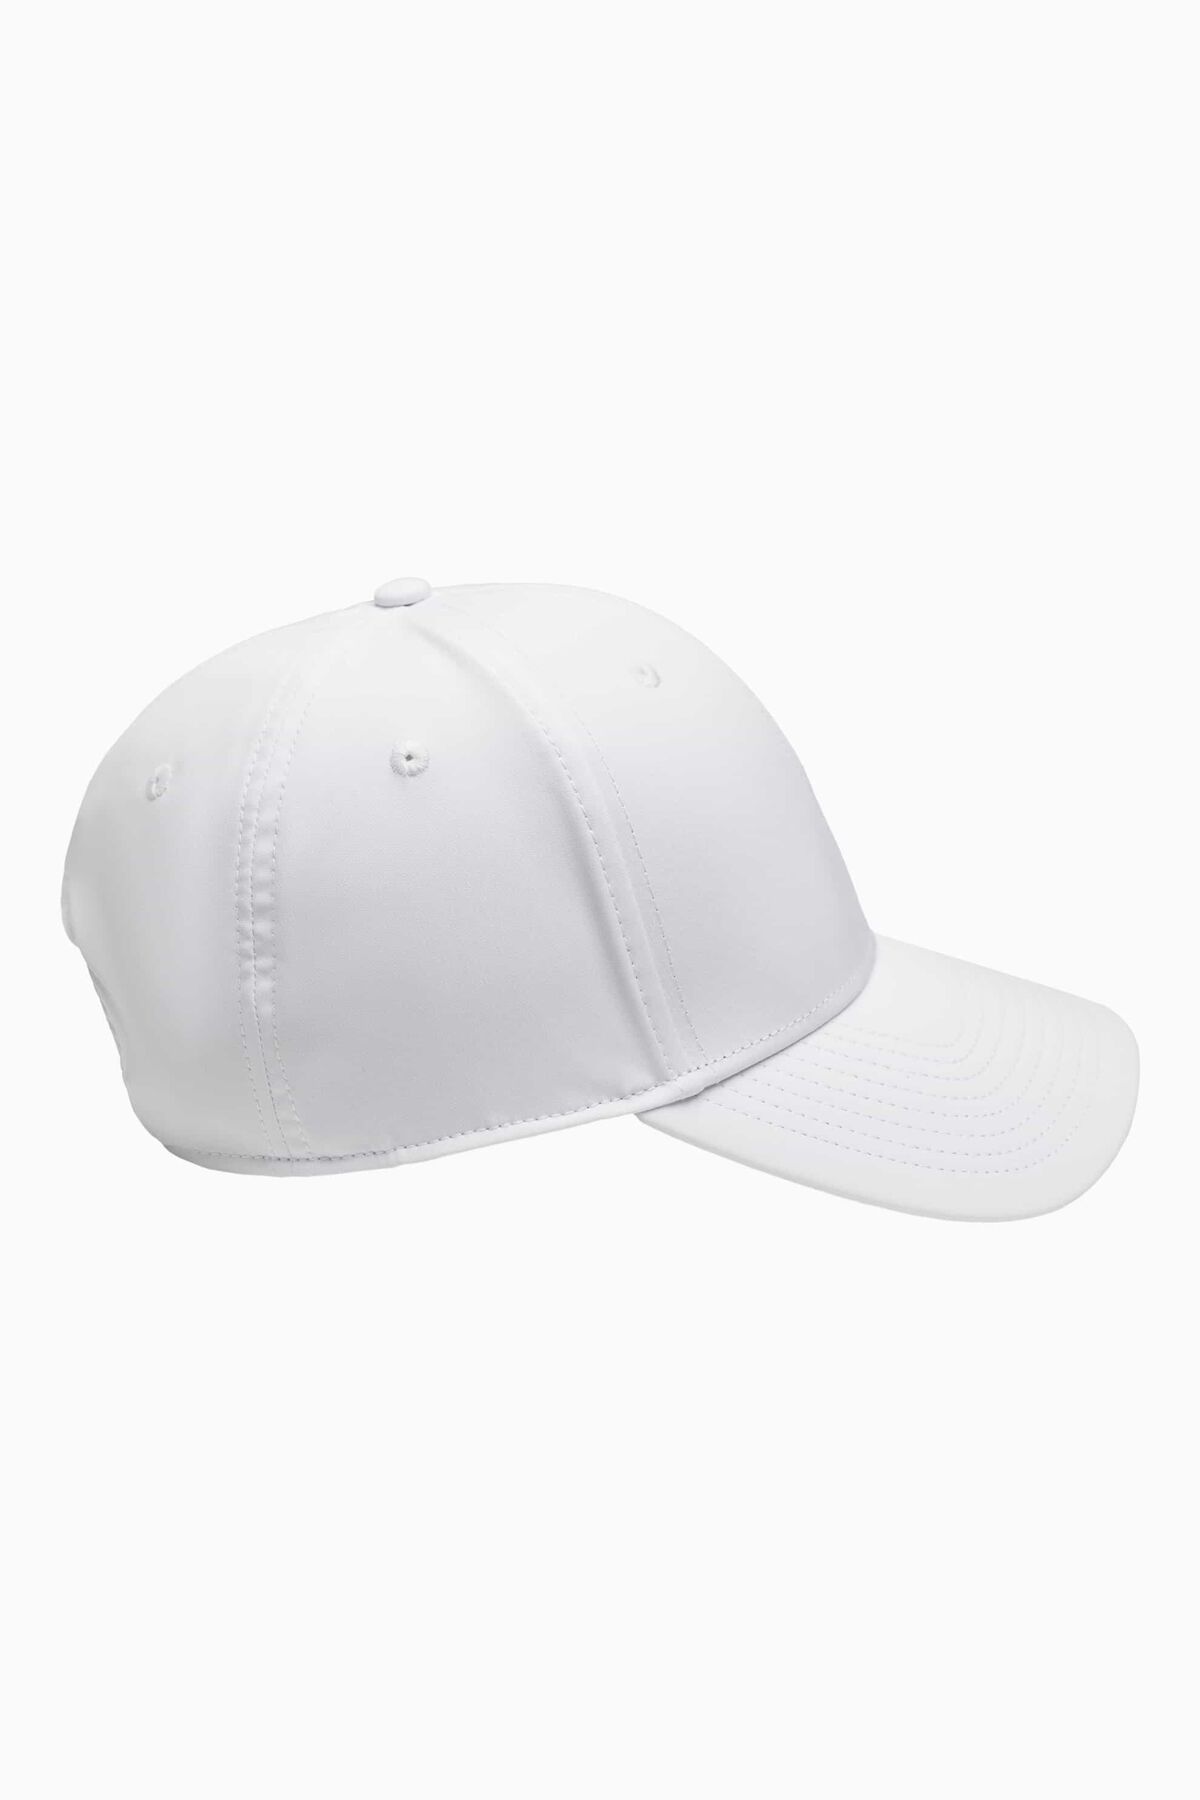 Faceted Minimalist 6 Panel Structured Cap White